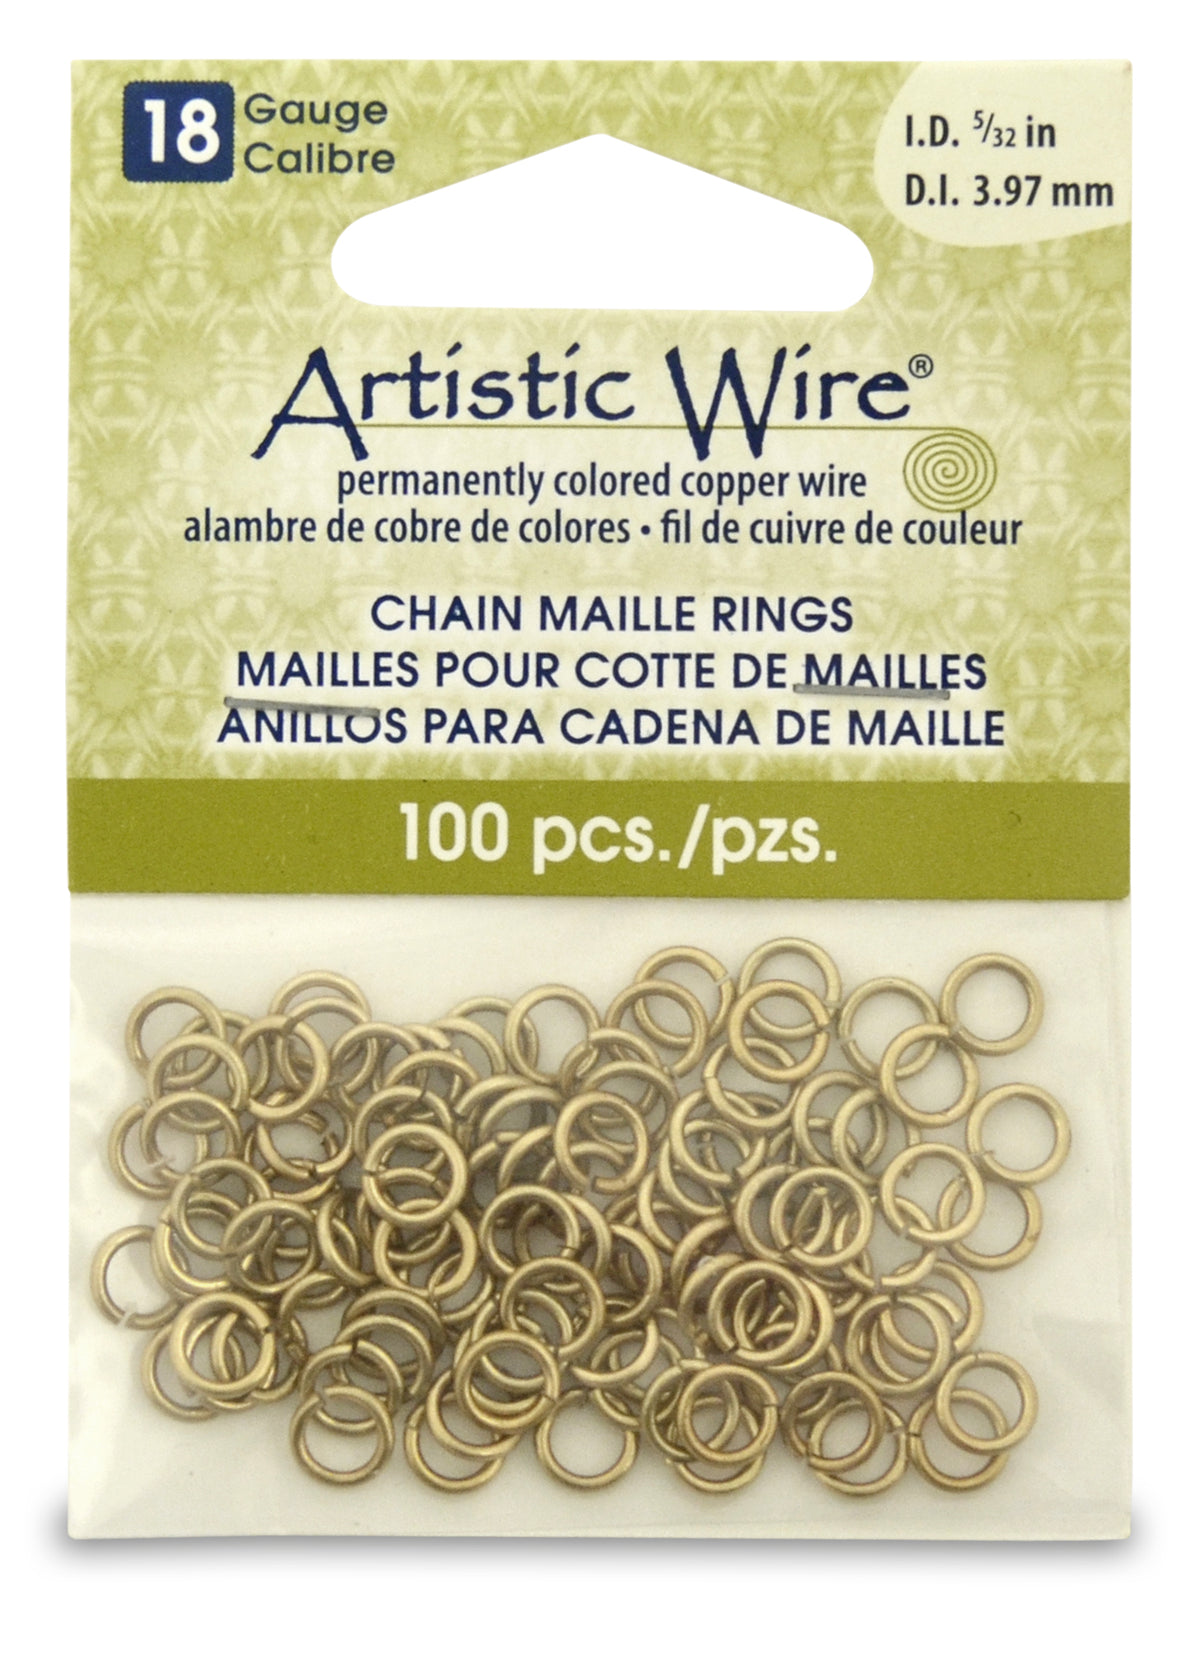 18 Gauge Artistic Wire, Chain Maille Rings, Round, Tarnish Resistant Brass, 5/32 in (3.97 mm), 100 pc